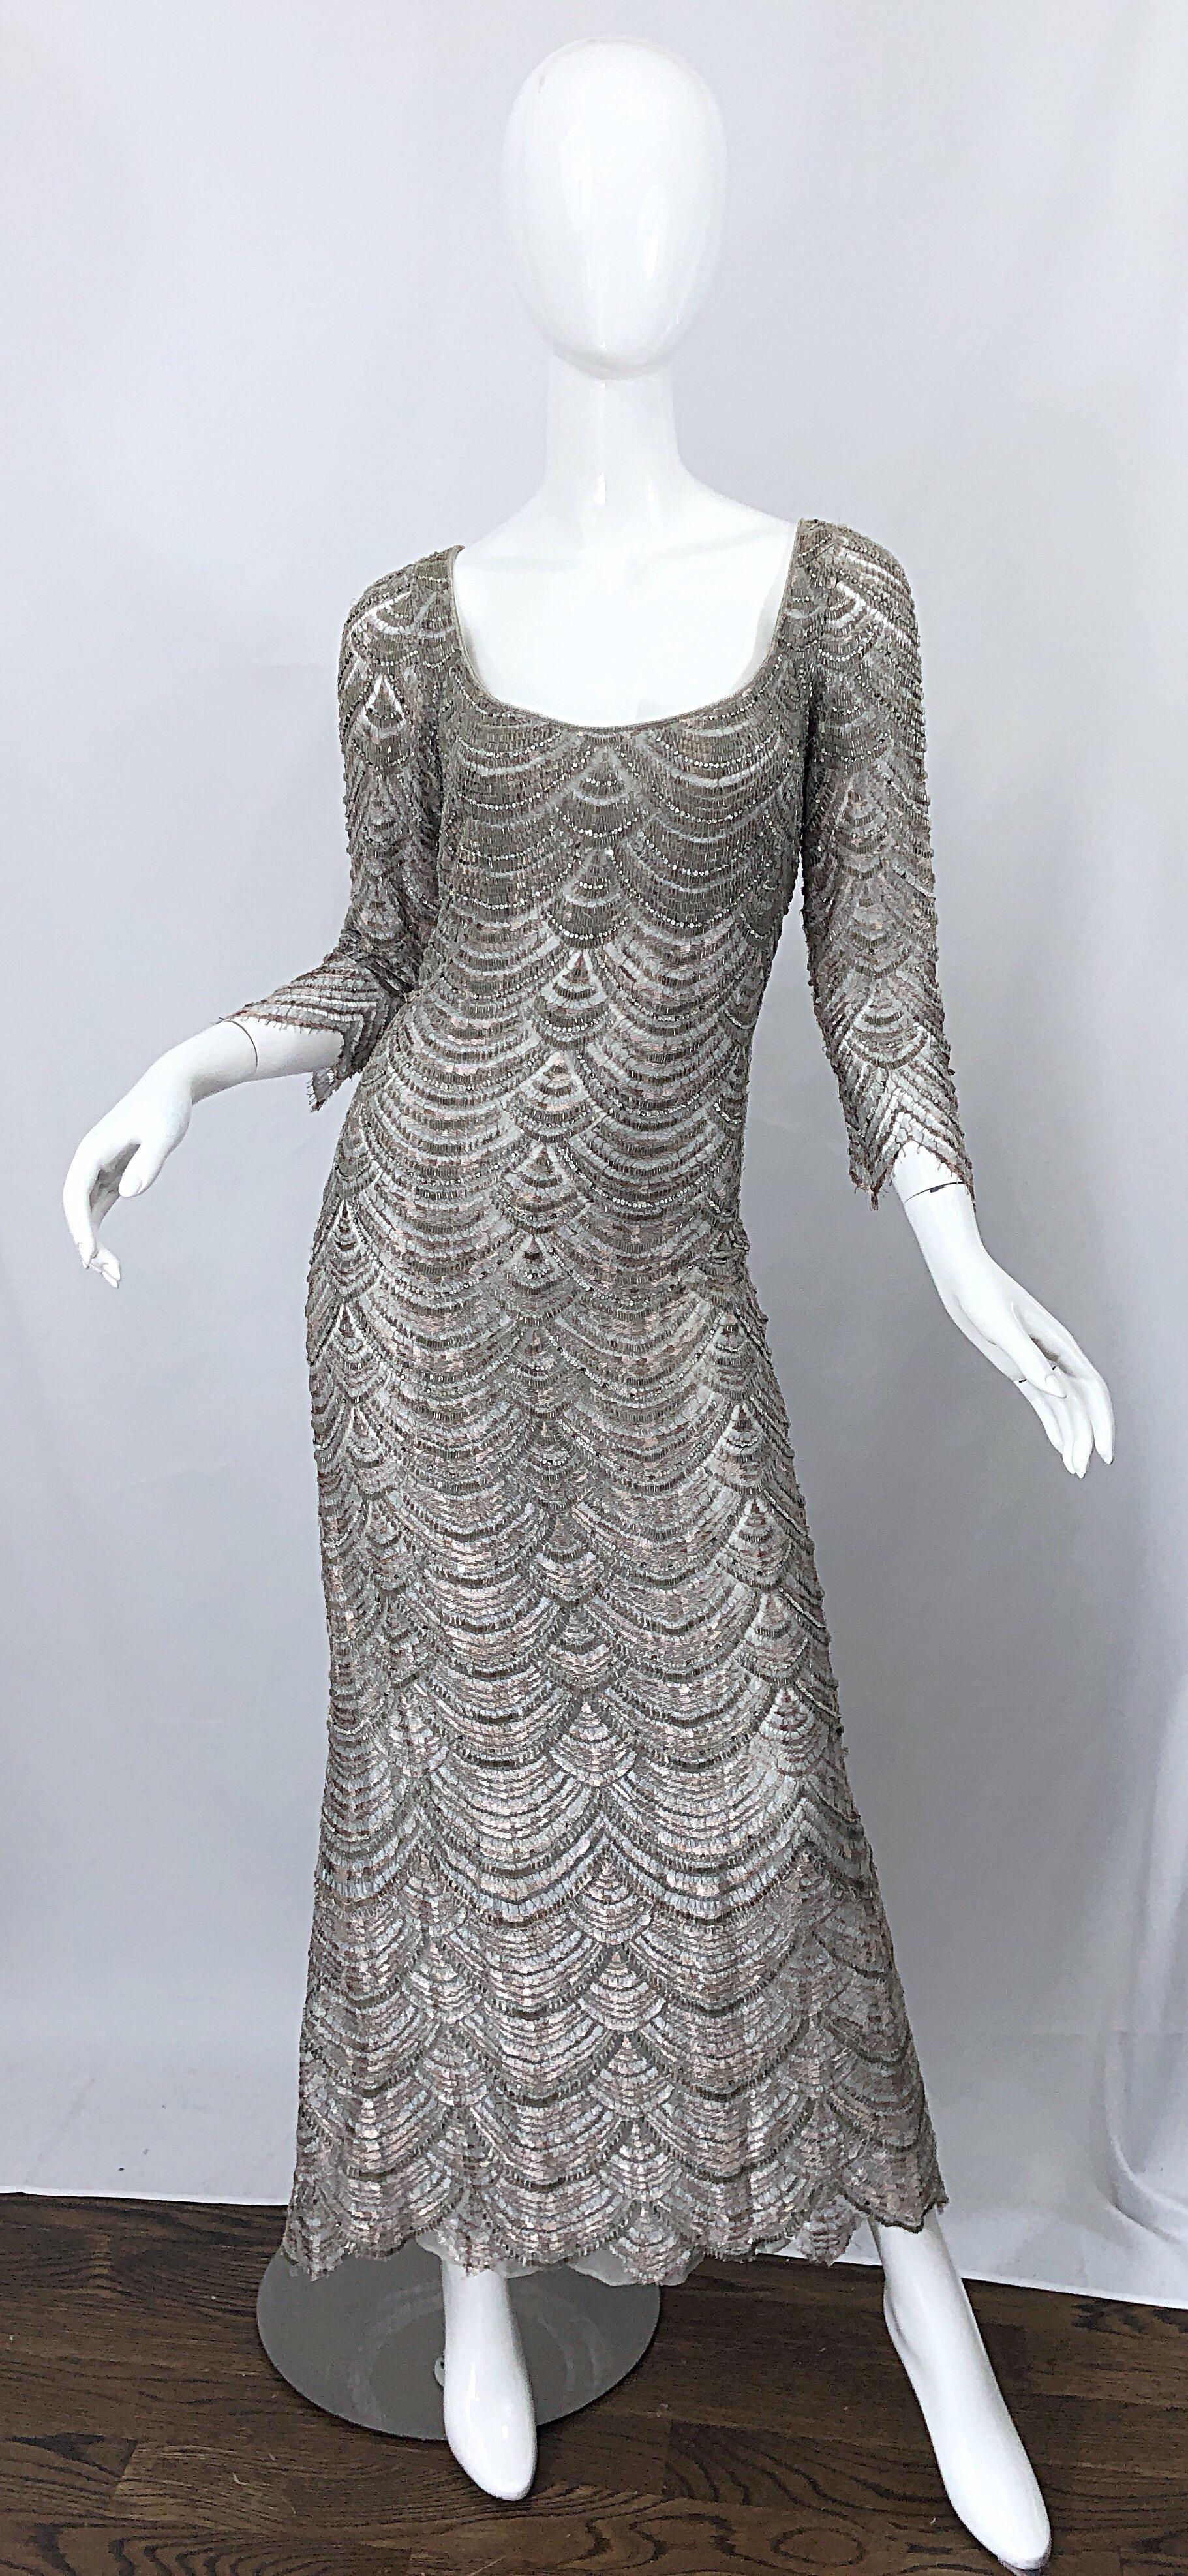 Beautiful vintage 1990s BADGLEY MISCHKA size 12 gray fully beaded + rhinestone deco style evening gown! Features elegant 3/4 sleeves with a fitted bodice and forgiving skirt. Hand crochet embroidery detail thorughout with thousands of 
hand-sewn